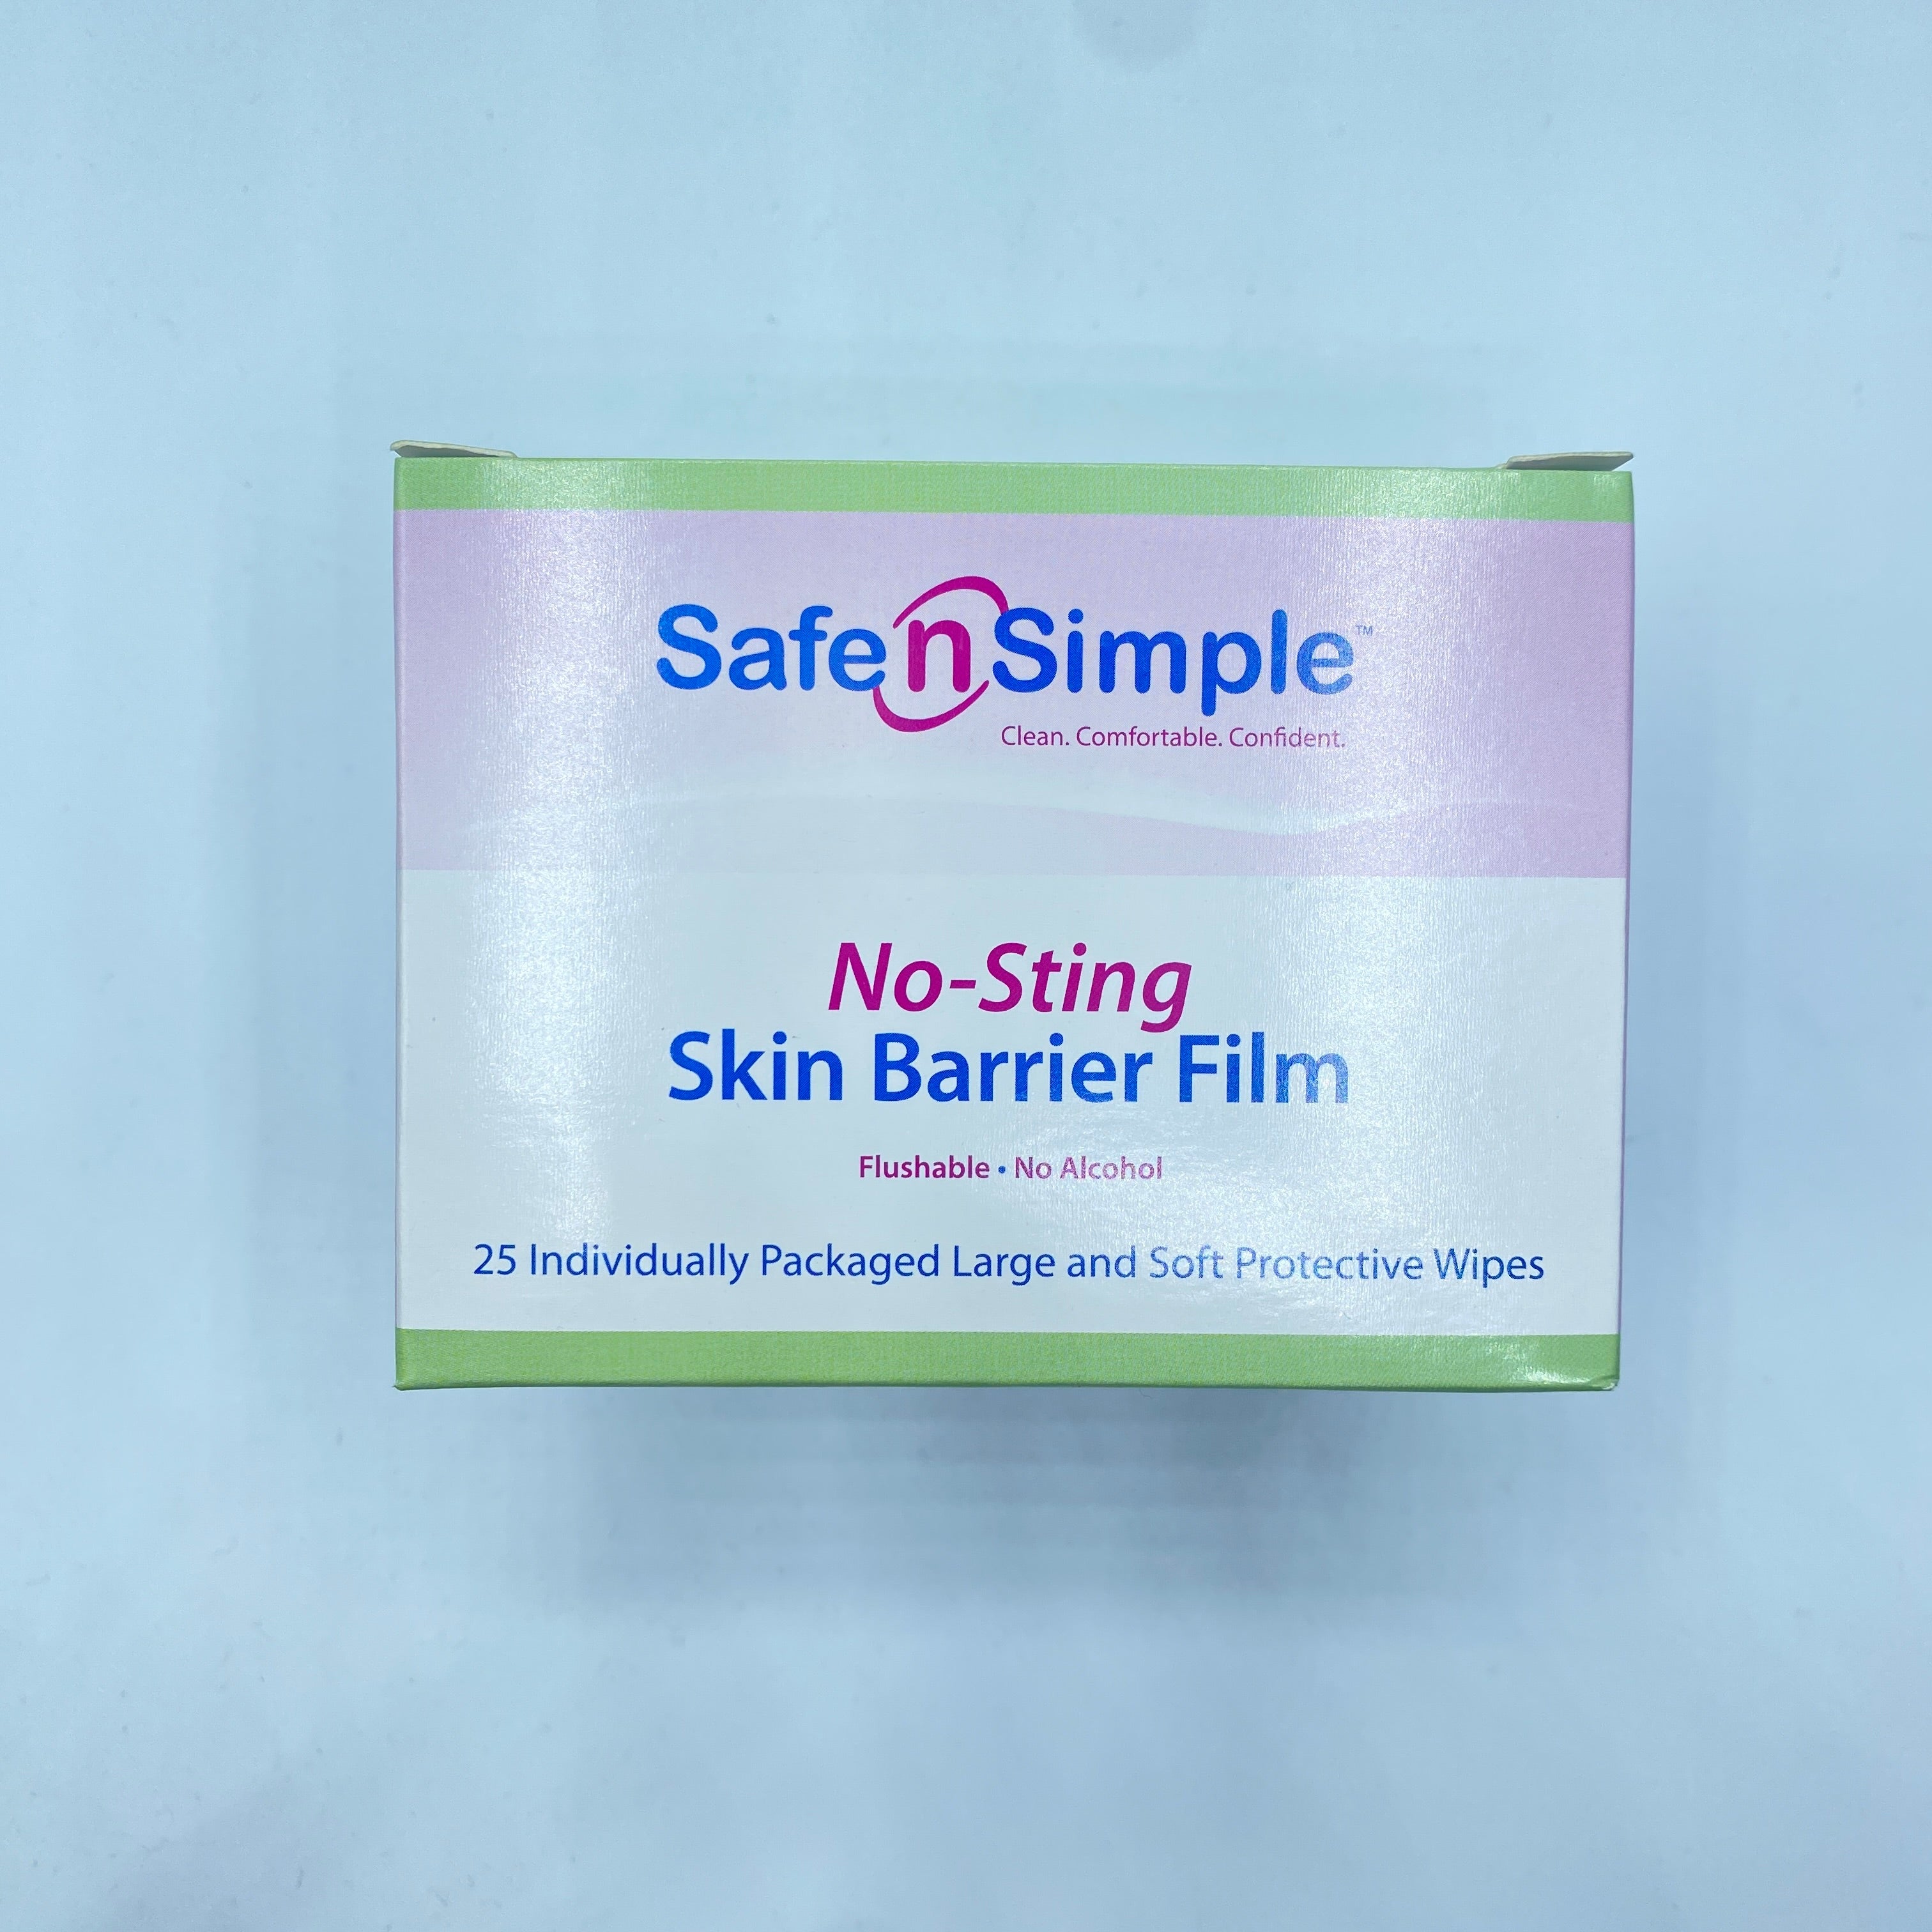 Safe n' Simple SNS00807 Skin Barrier Wipes, No-Sting Ostomy Care Barrier Film Wipes (Box of 25)